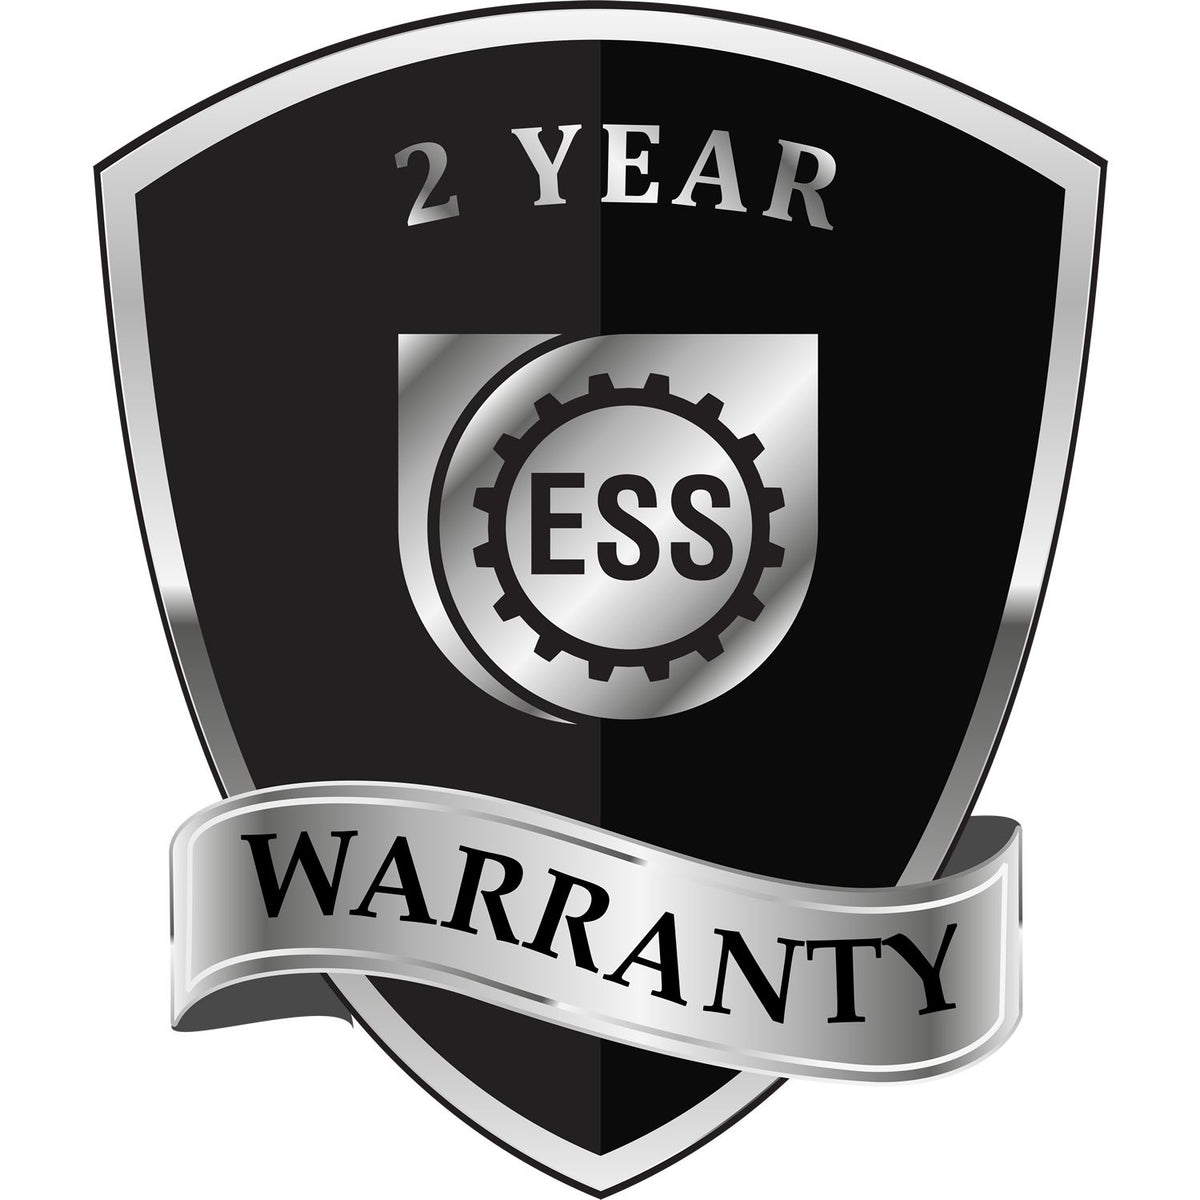 A black and silver badge or emblem showing warranty information for the Gift North Carolina Engineer Seal